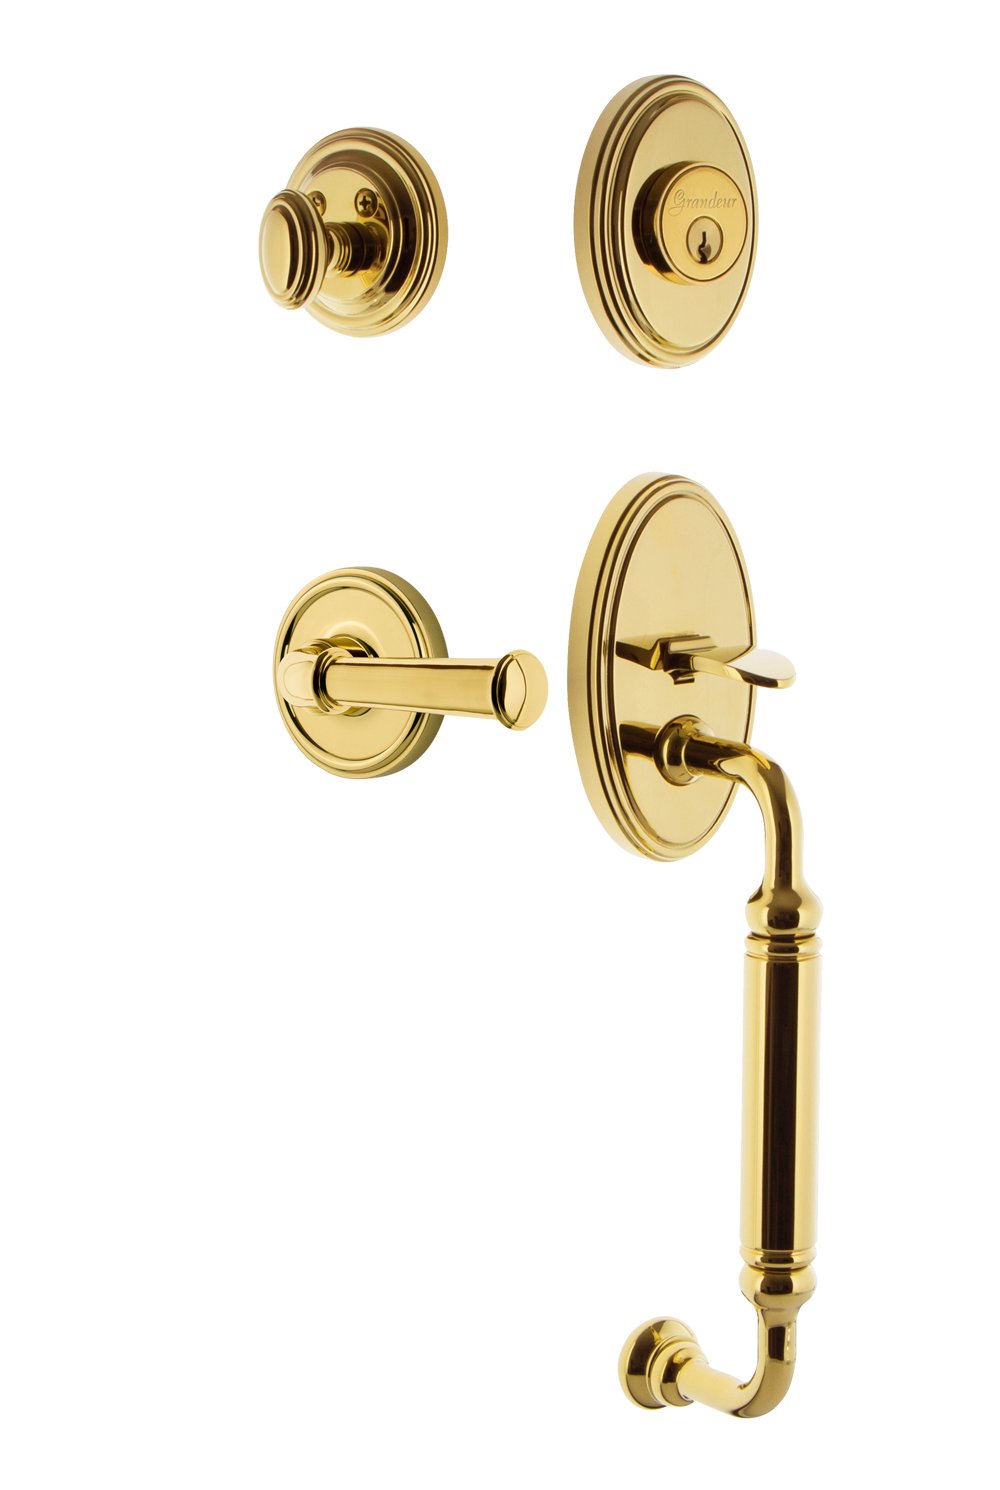 Georgetown Rosette "C" Grip Entry Set With Georgetown Lever in Lifetime Brass